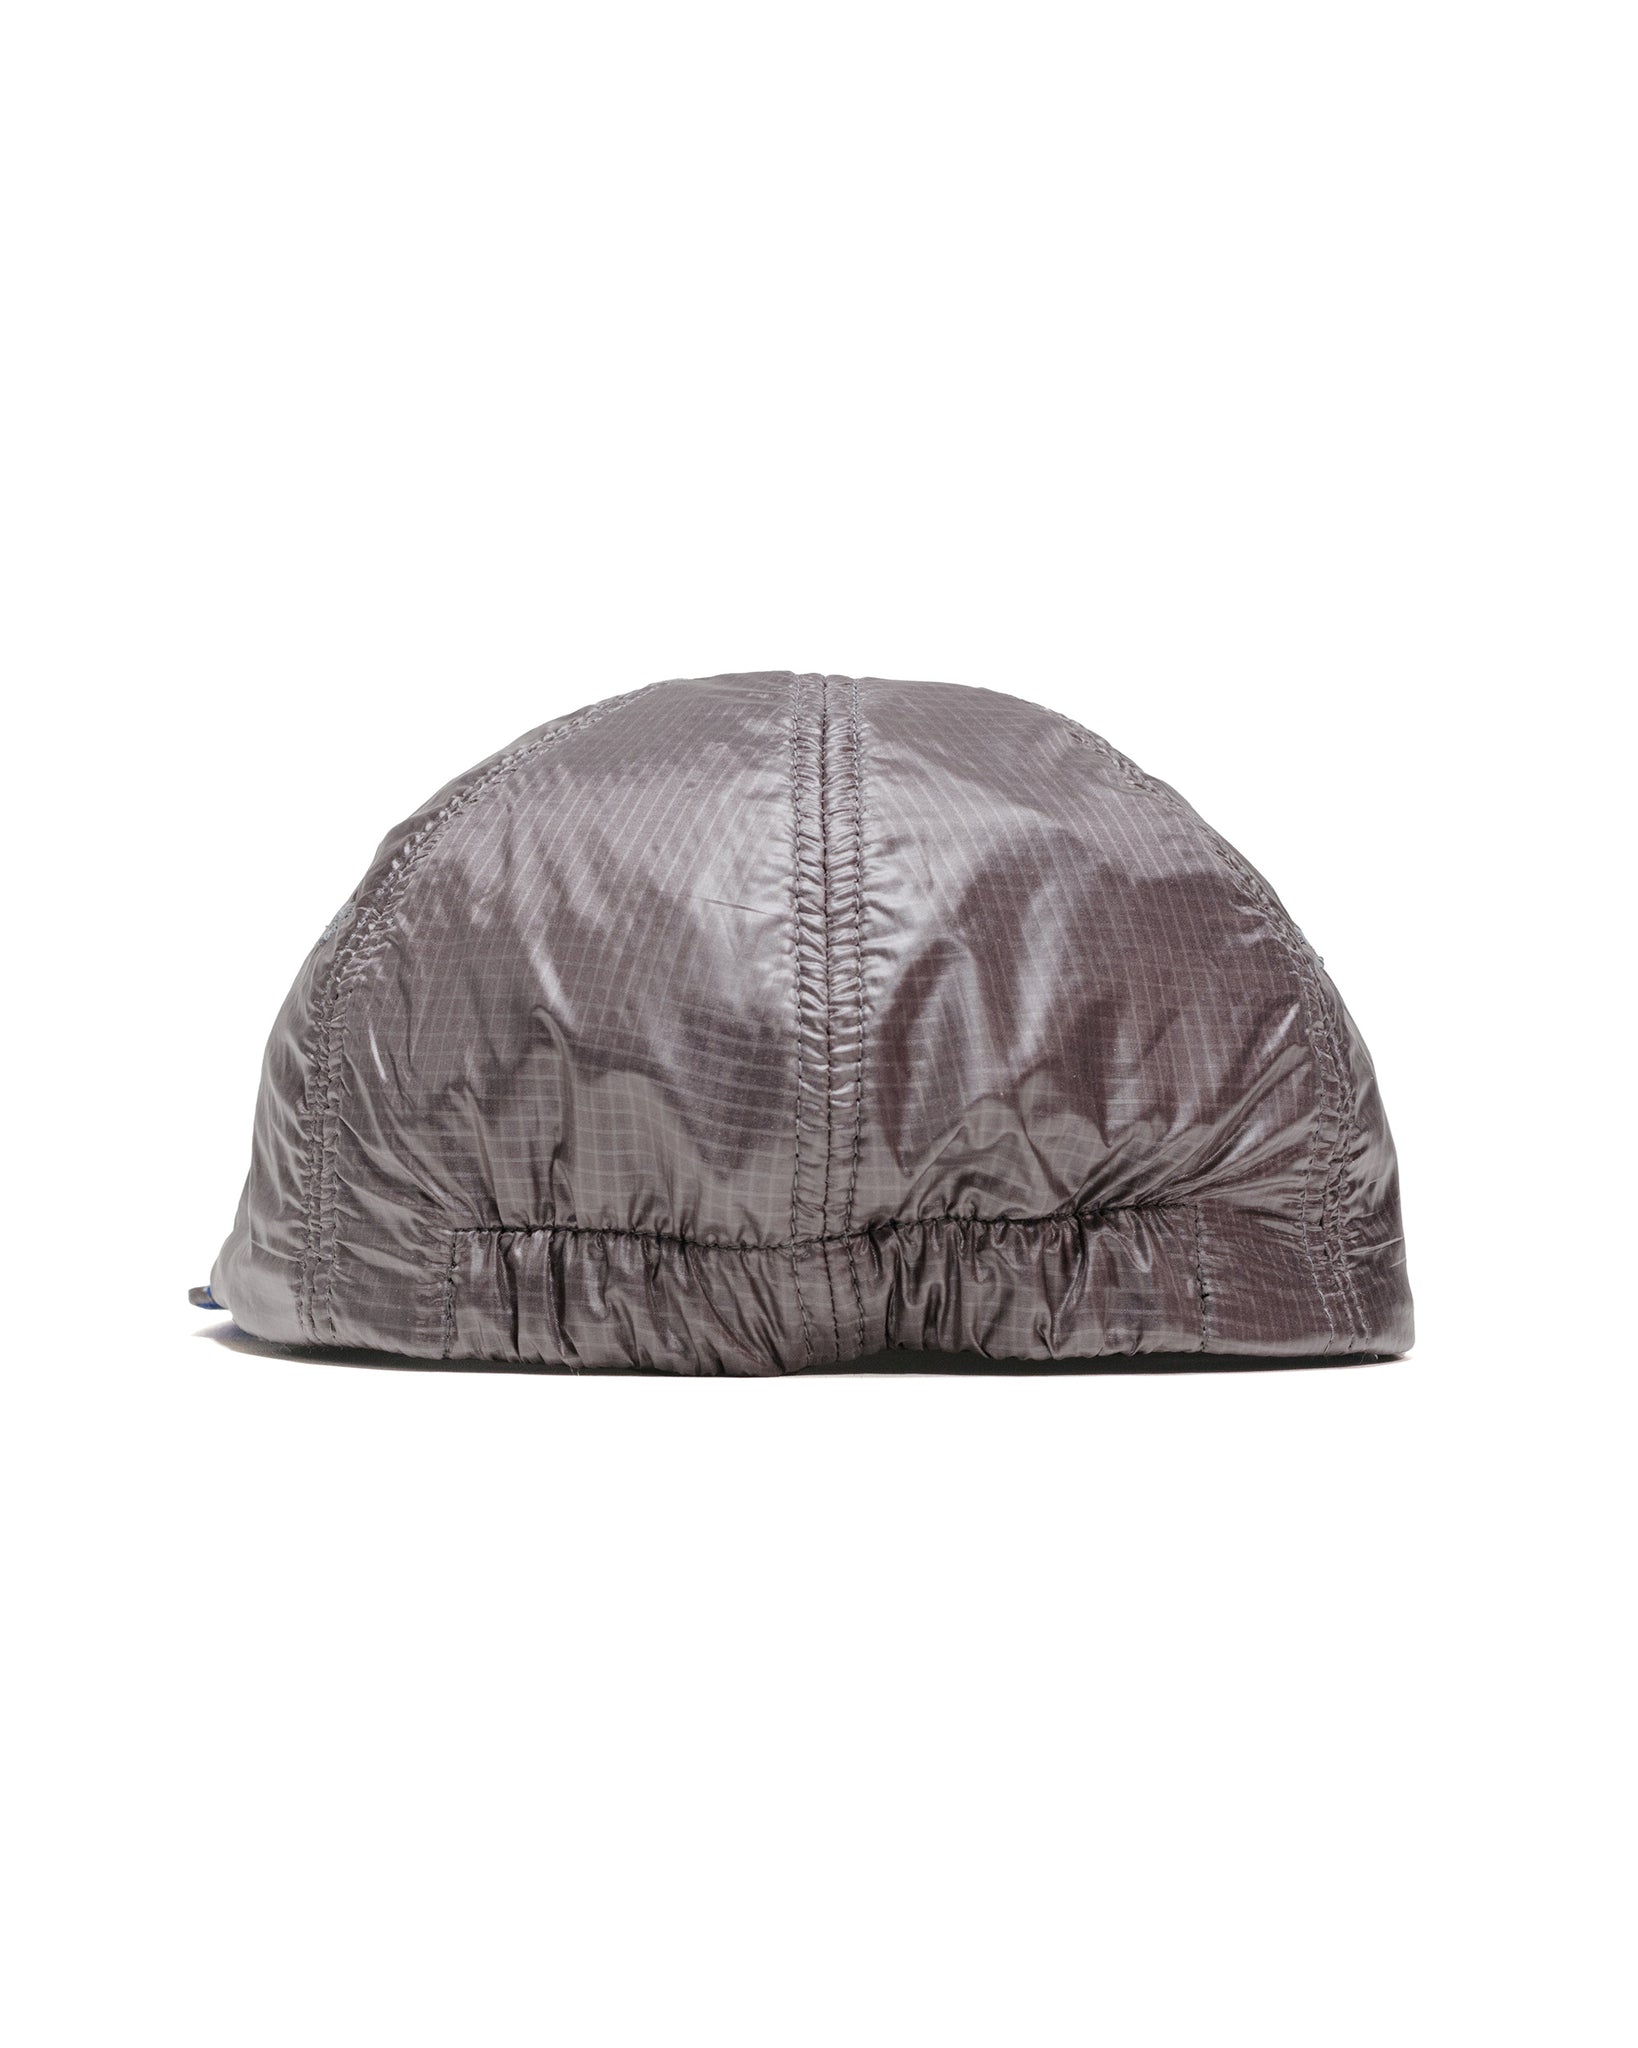 Found Feather Classic 6 Panel Cap Air Light Ripstop Charcoal back